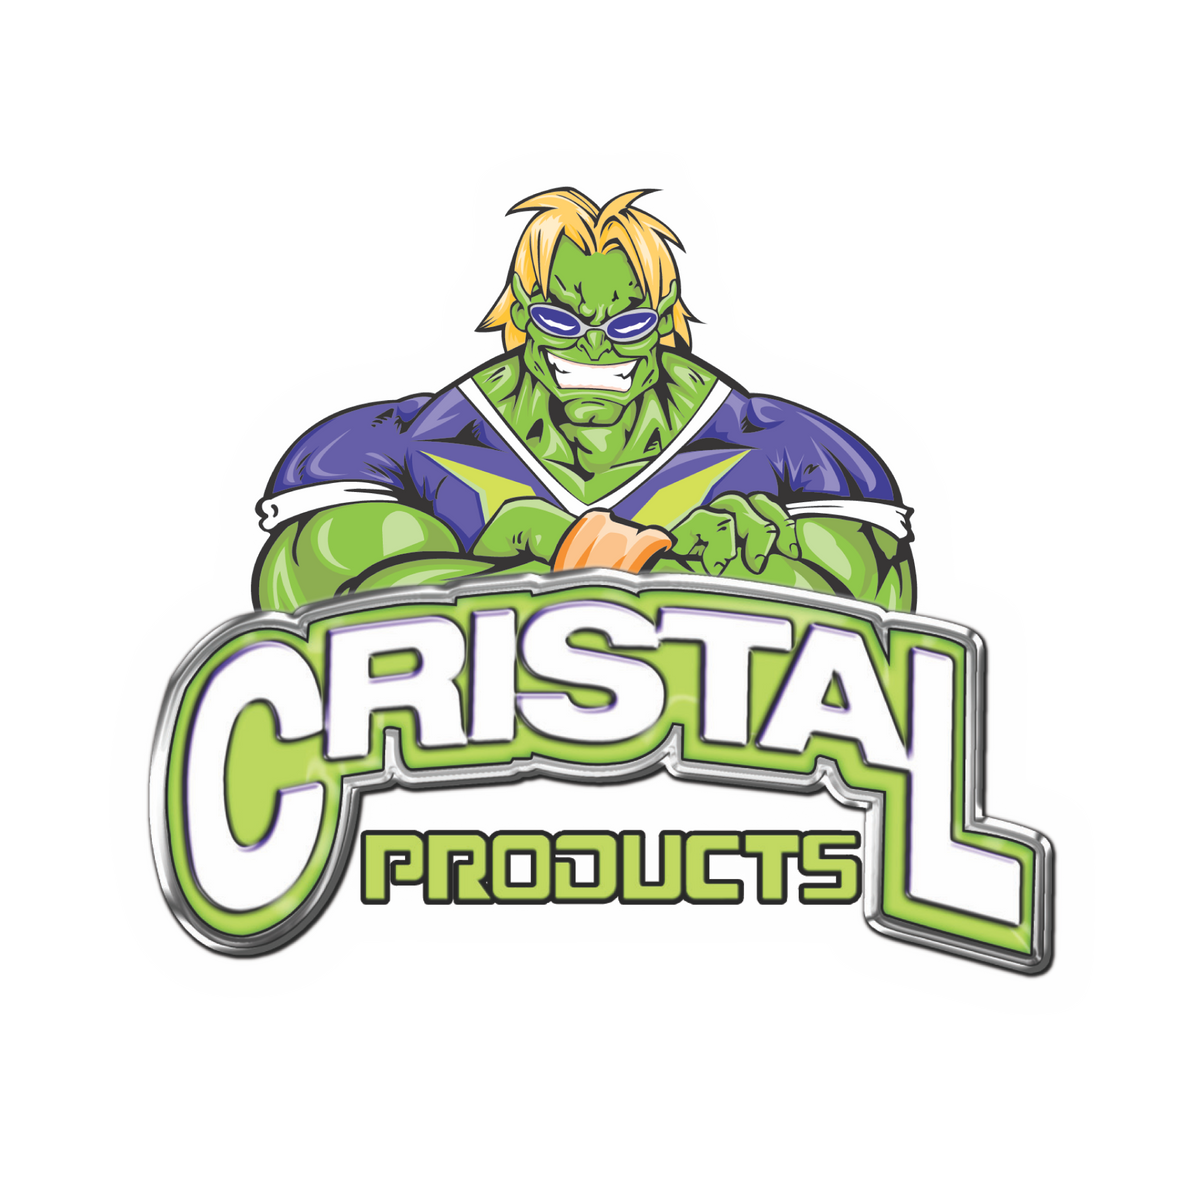 Cristal Products (@cristalproducts) • Instagram photos and videos